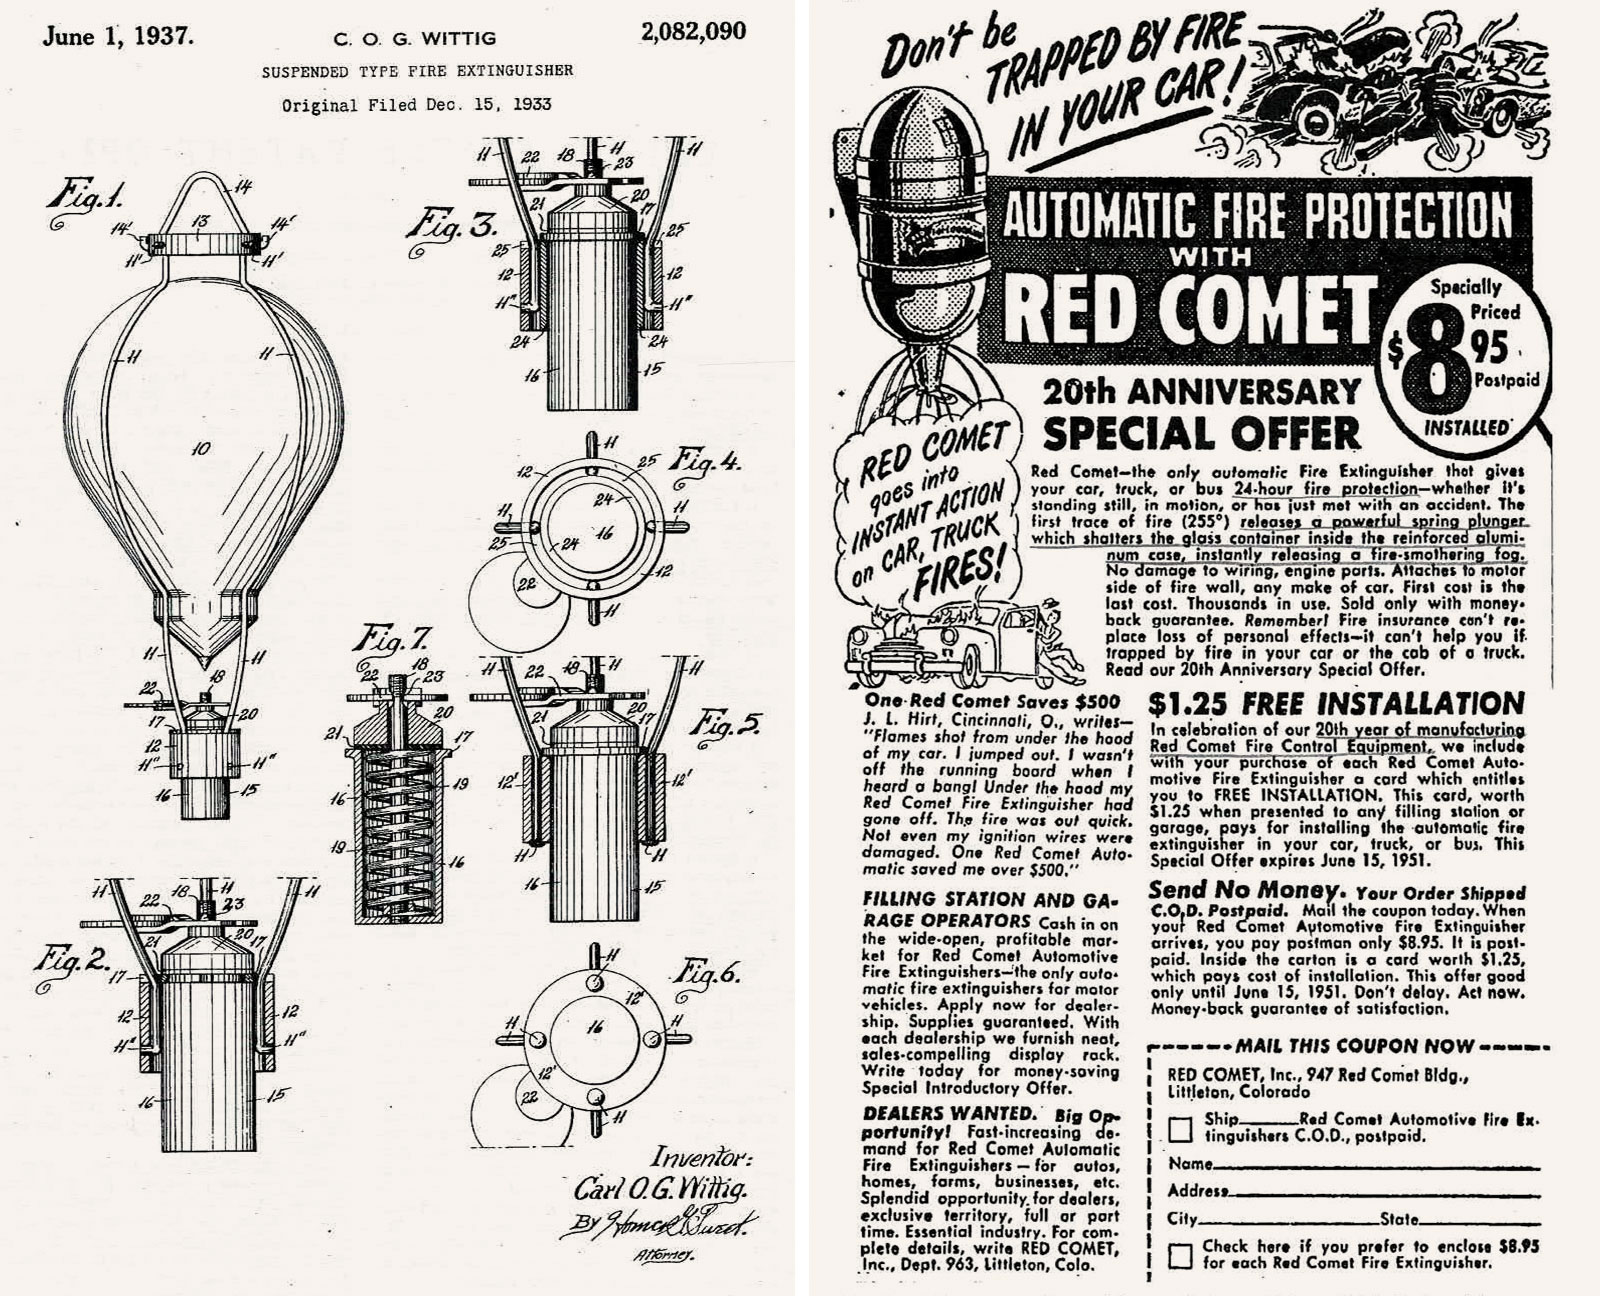 Patent and ad